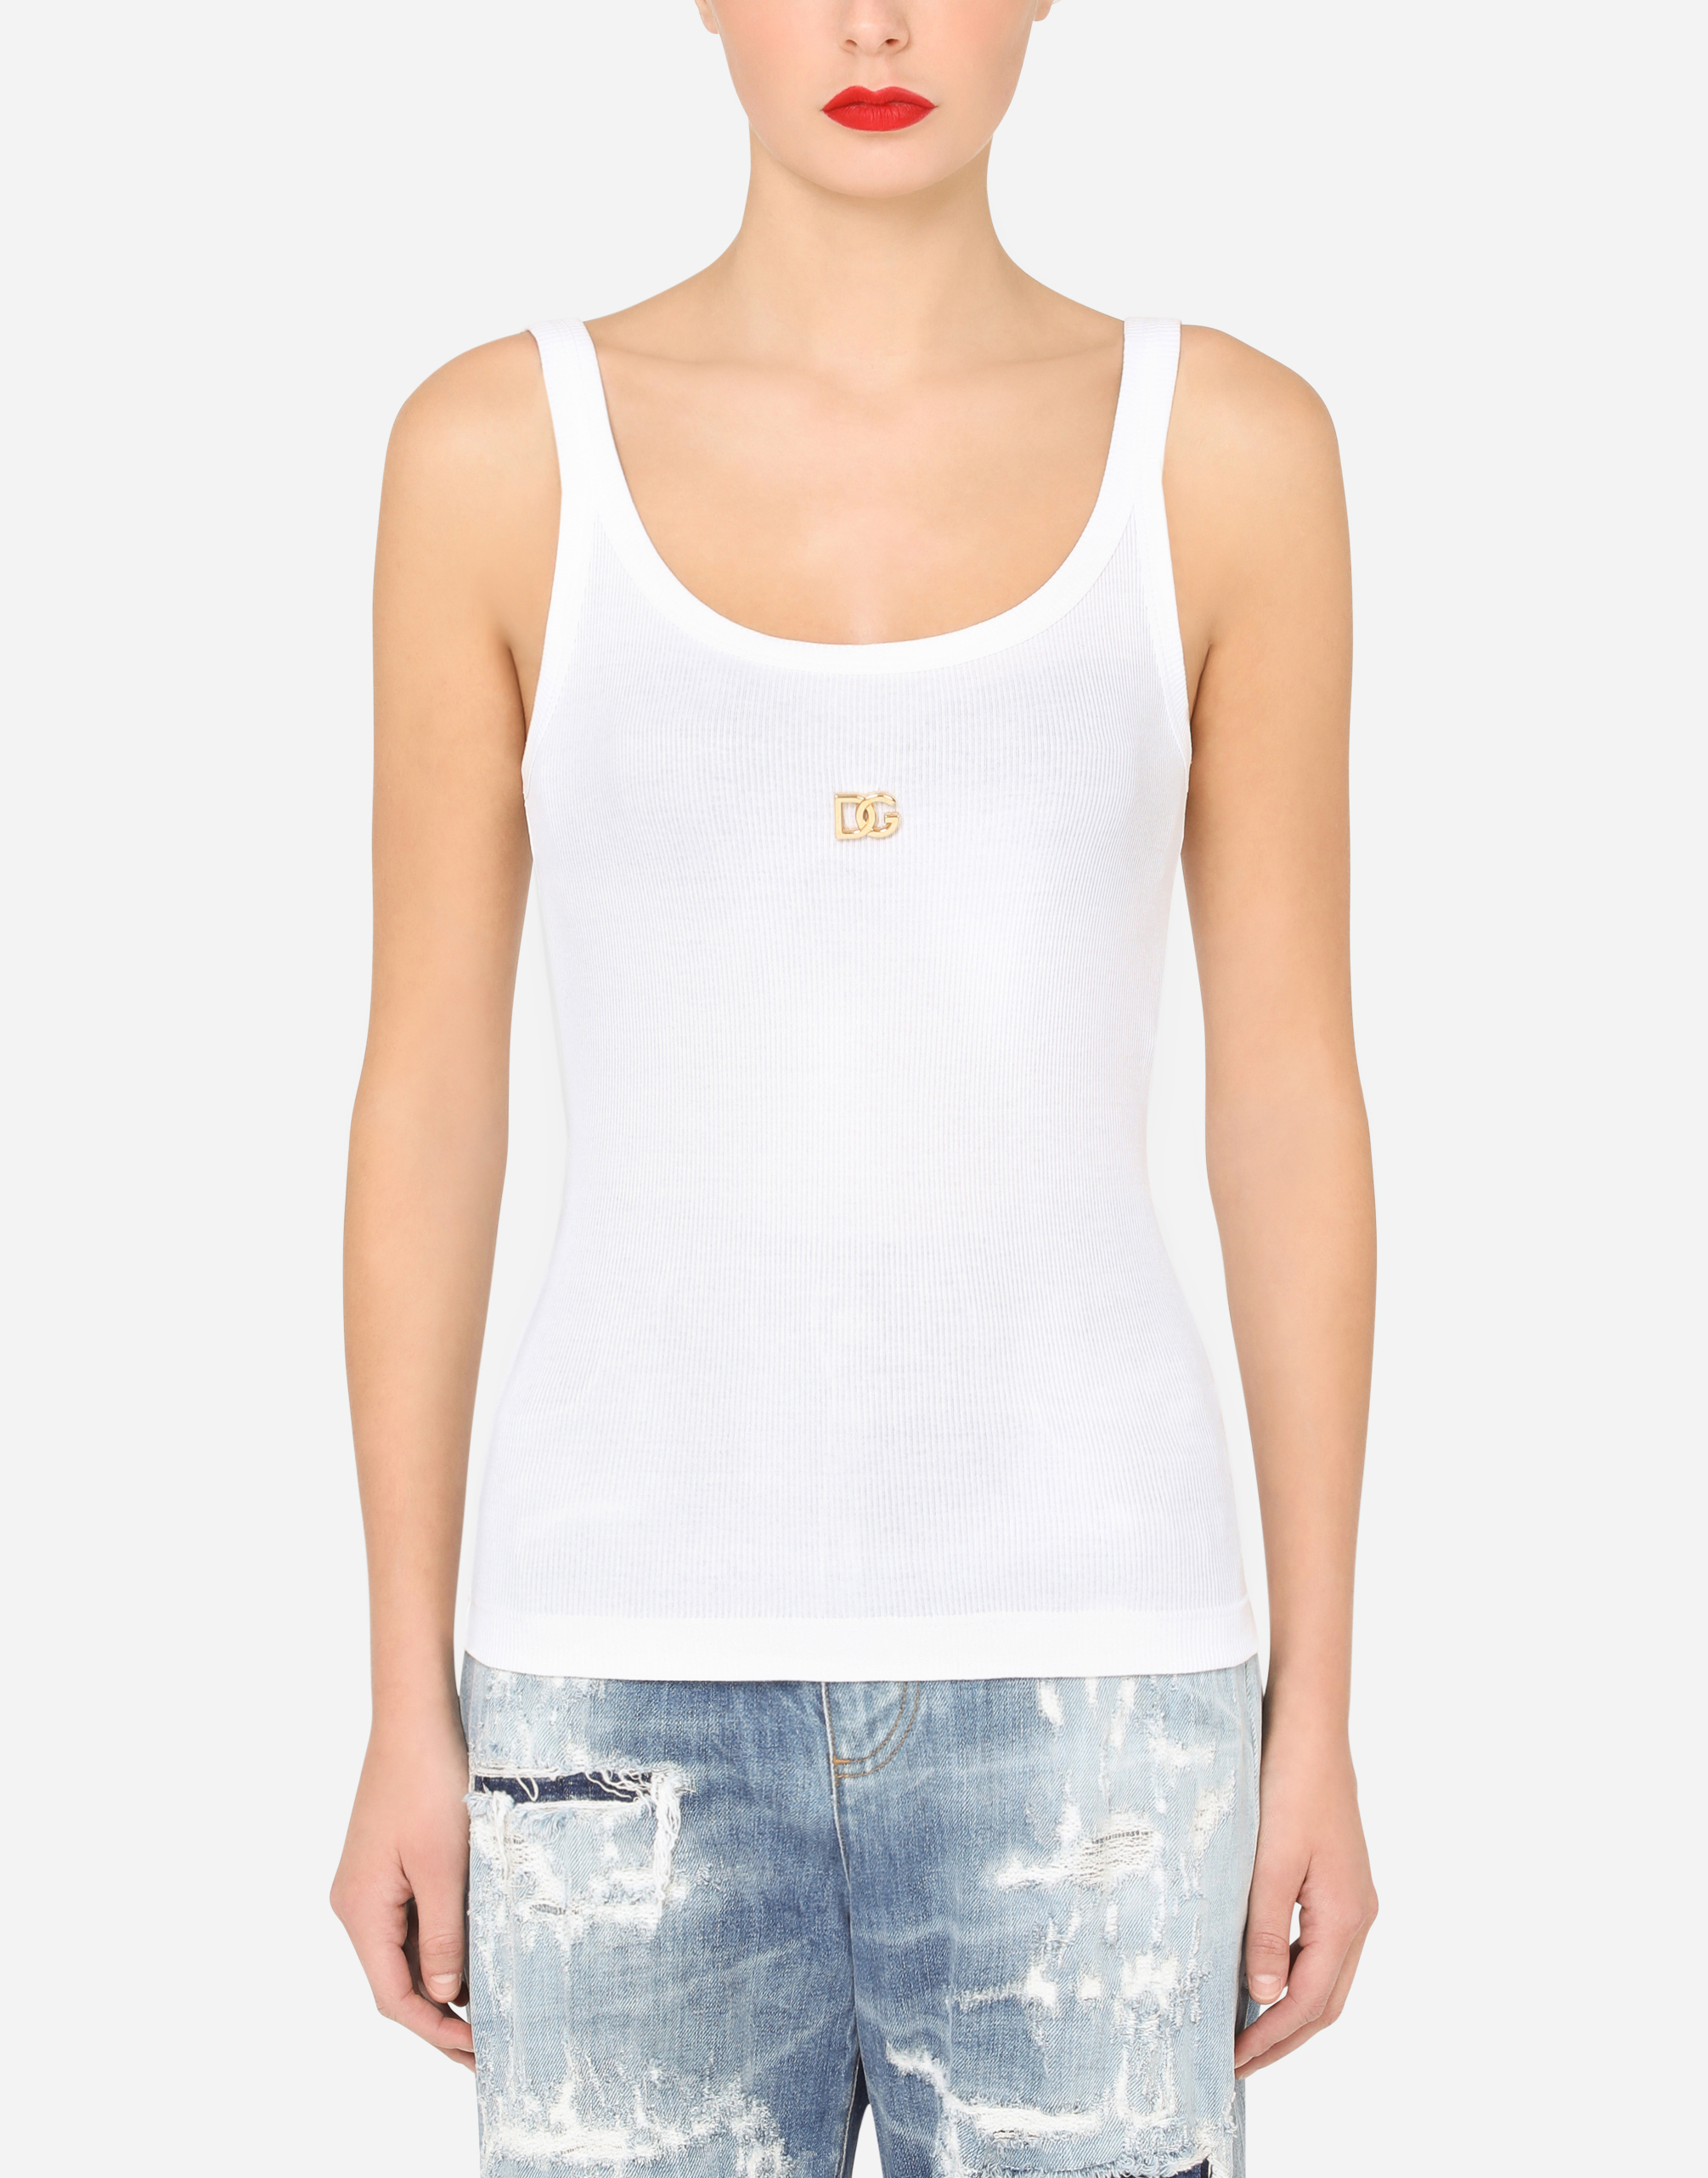 Fine-rib jersey tank top with DG logo in White